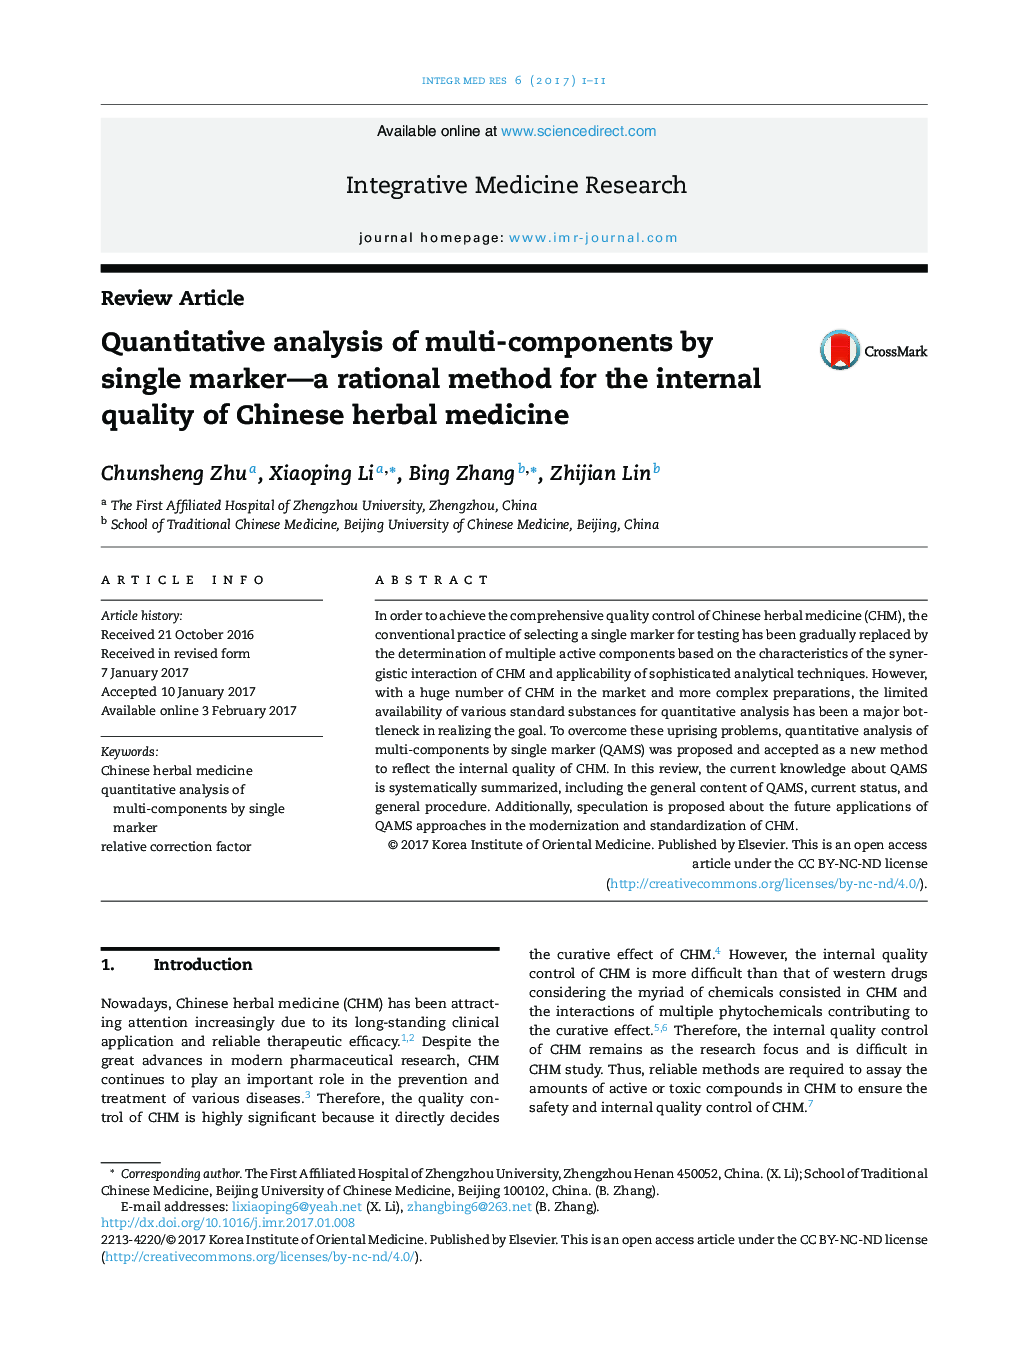 Quantitative analysis of multi-components by single marker-a rational method for the internal quality of Chinese herbal medicine